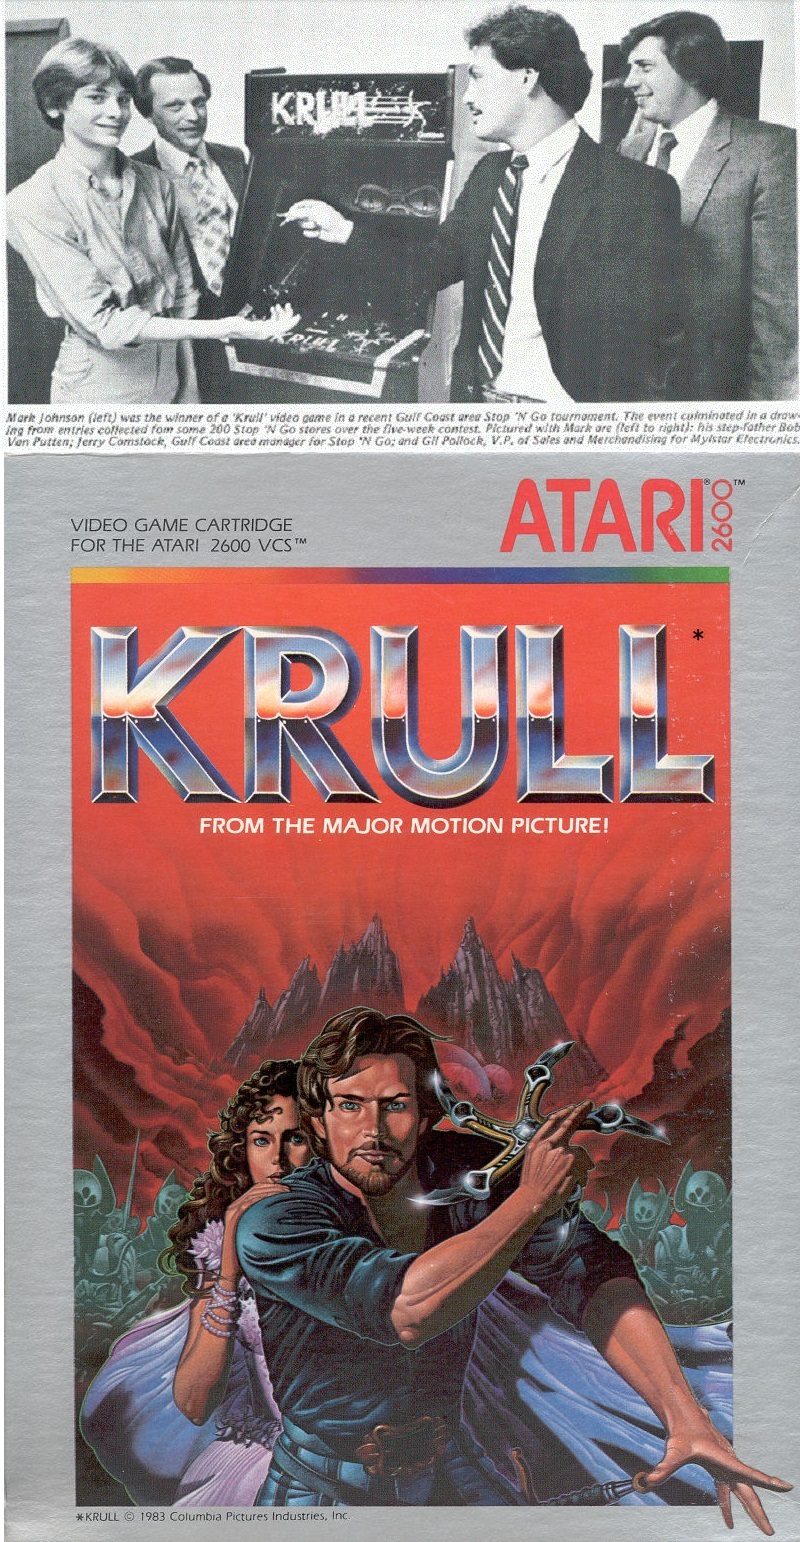 vr-krull-contest-and-atari-game